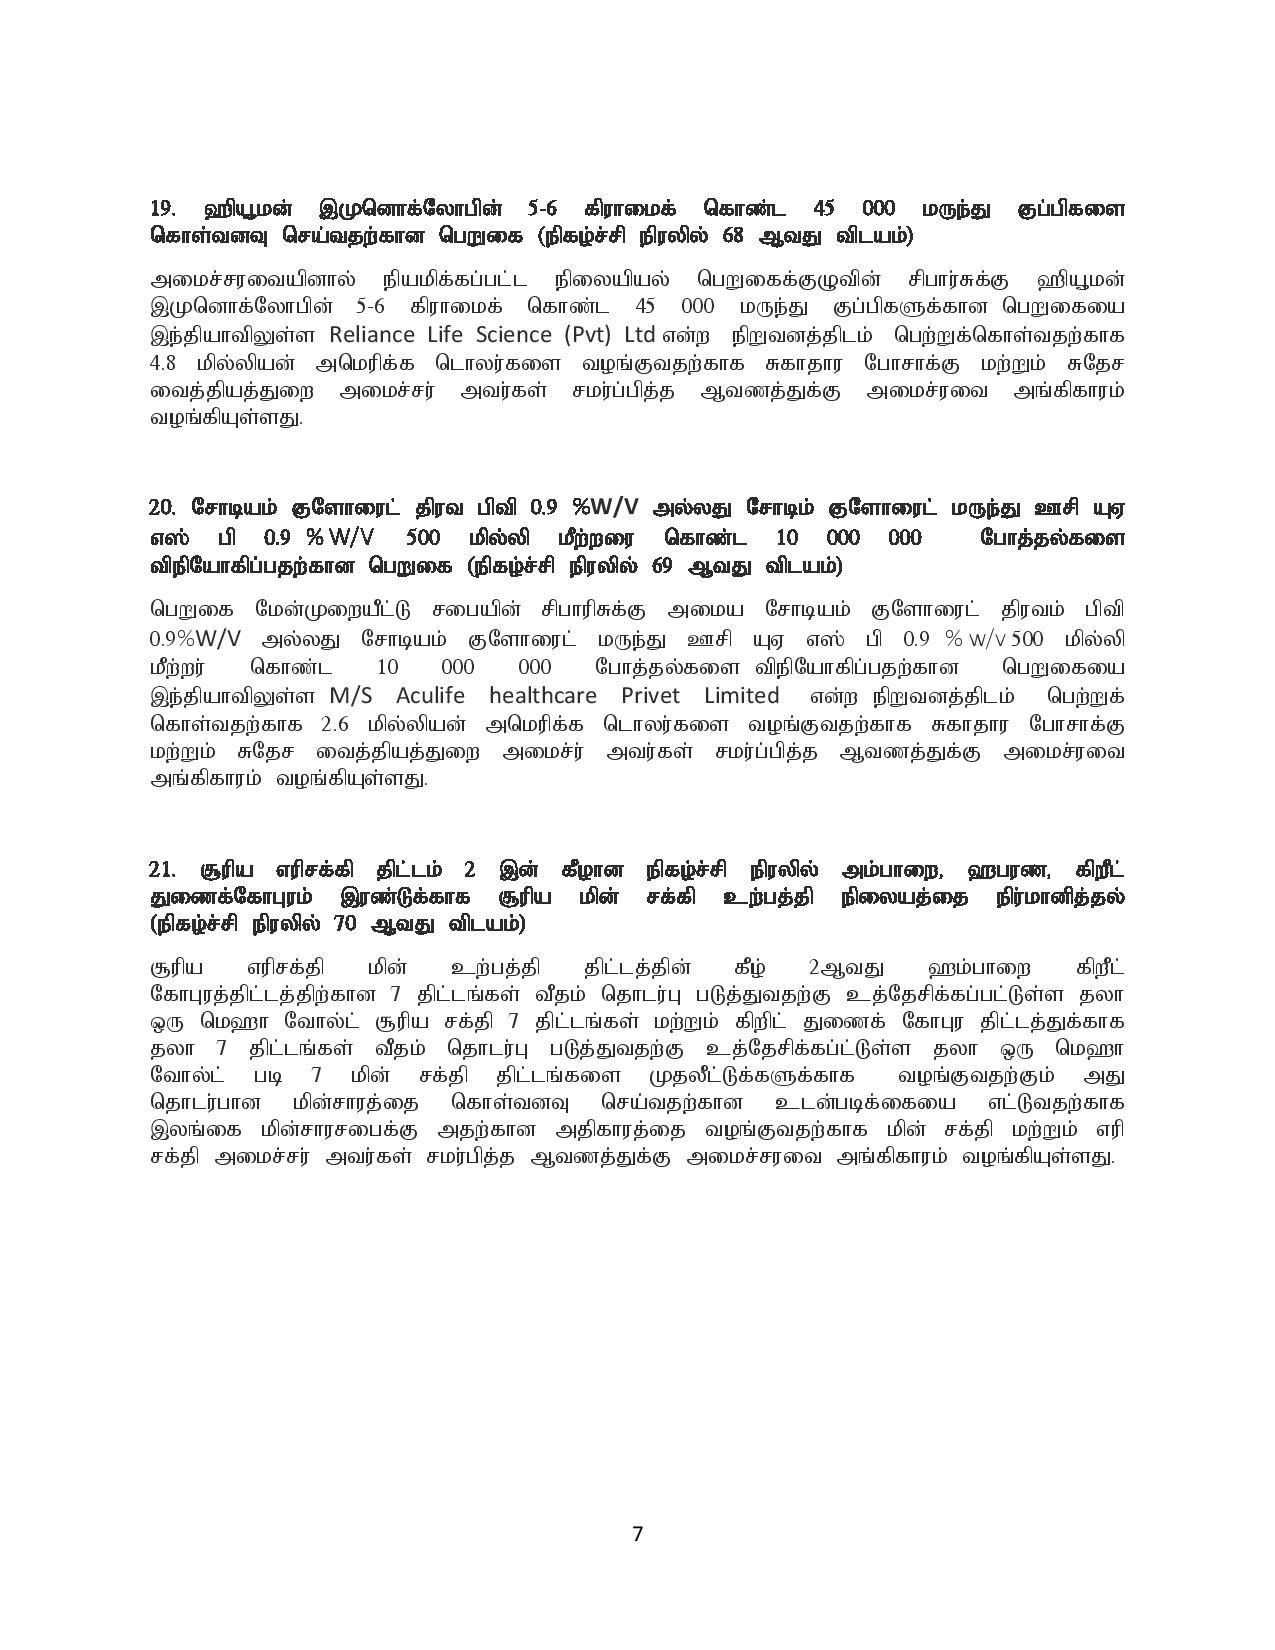 cabinet decision Tamil 19.07.2019 page 007